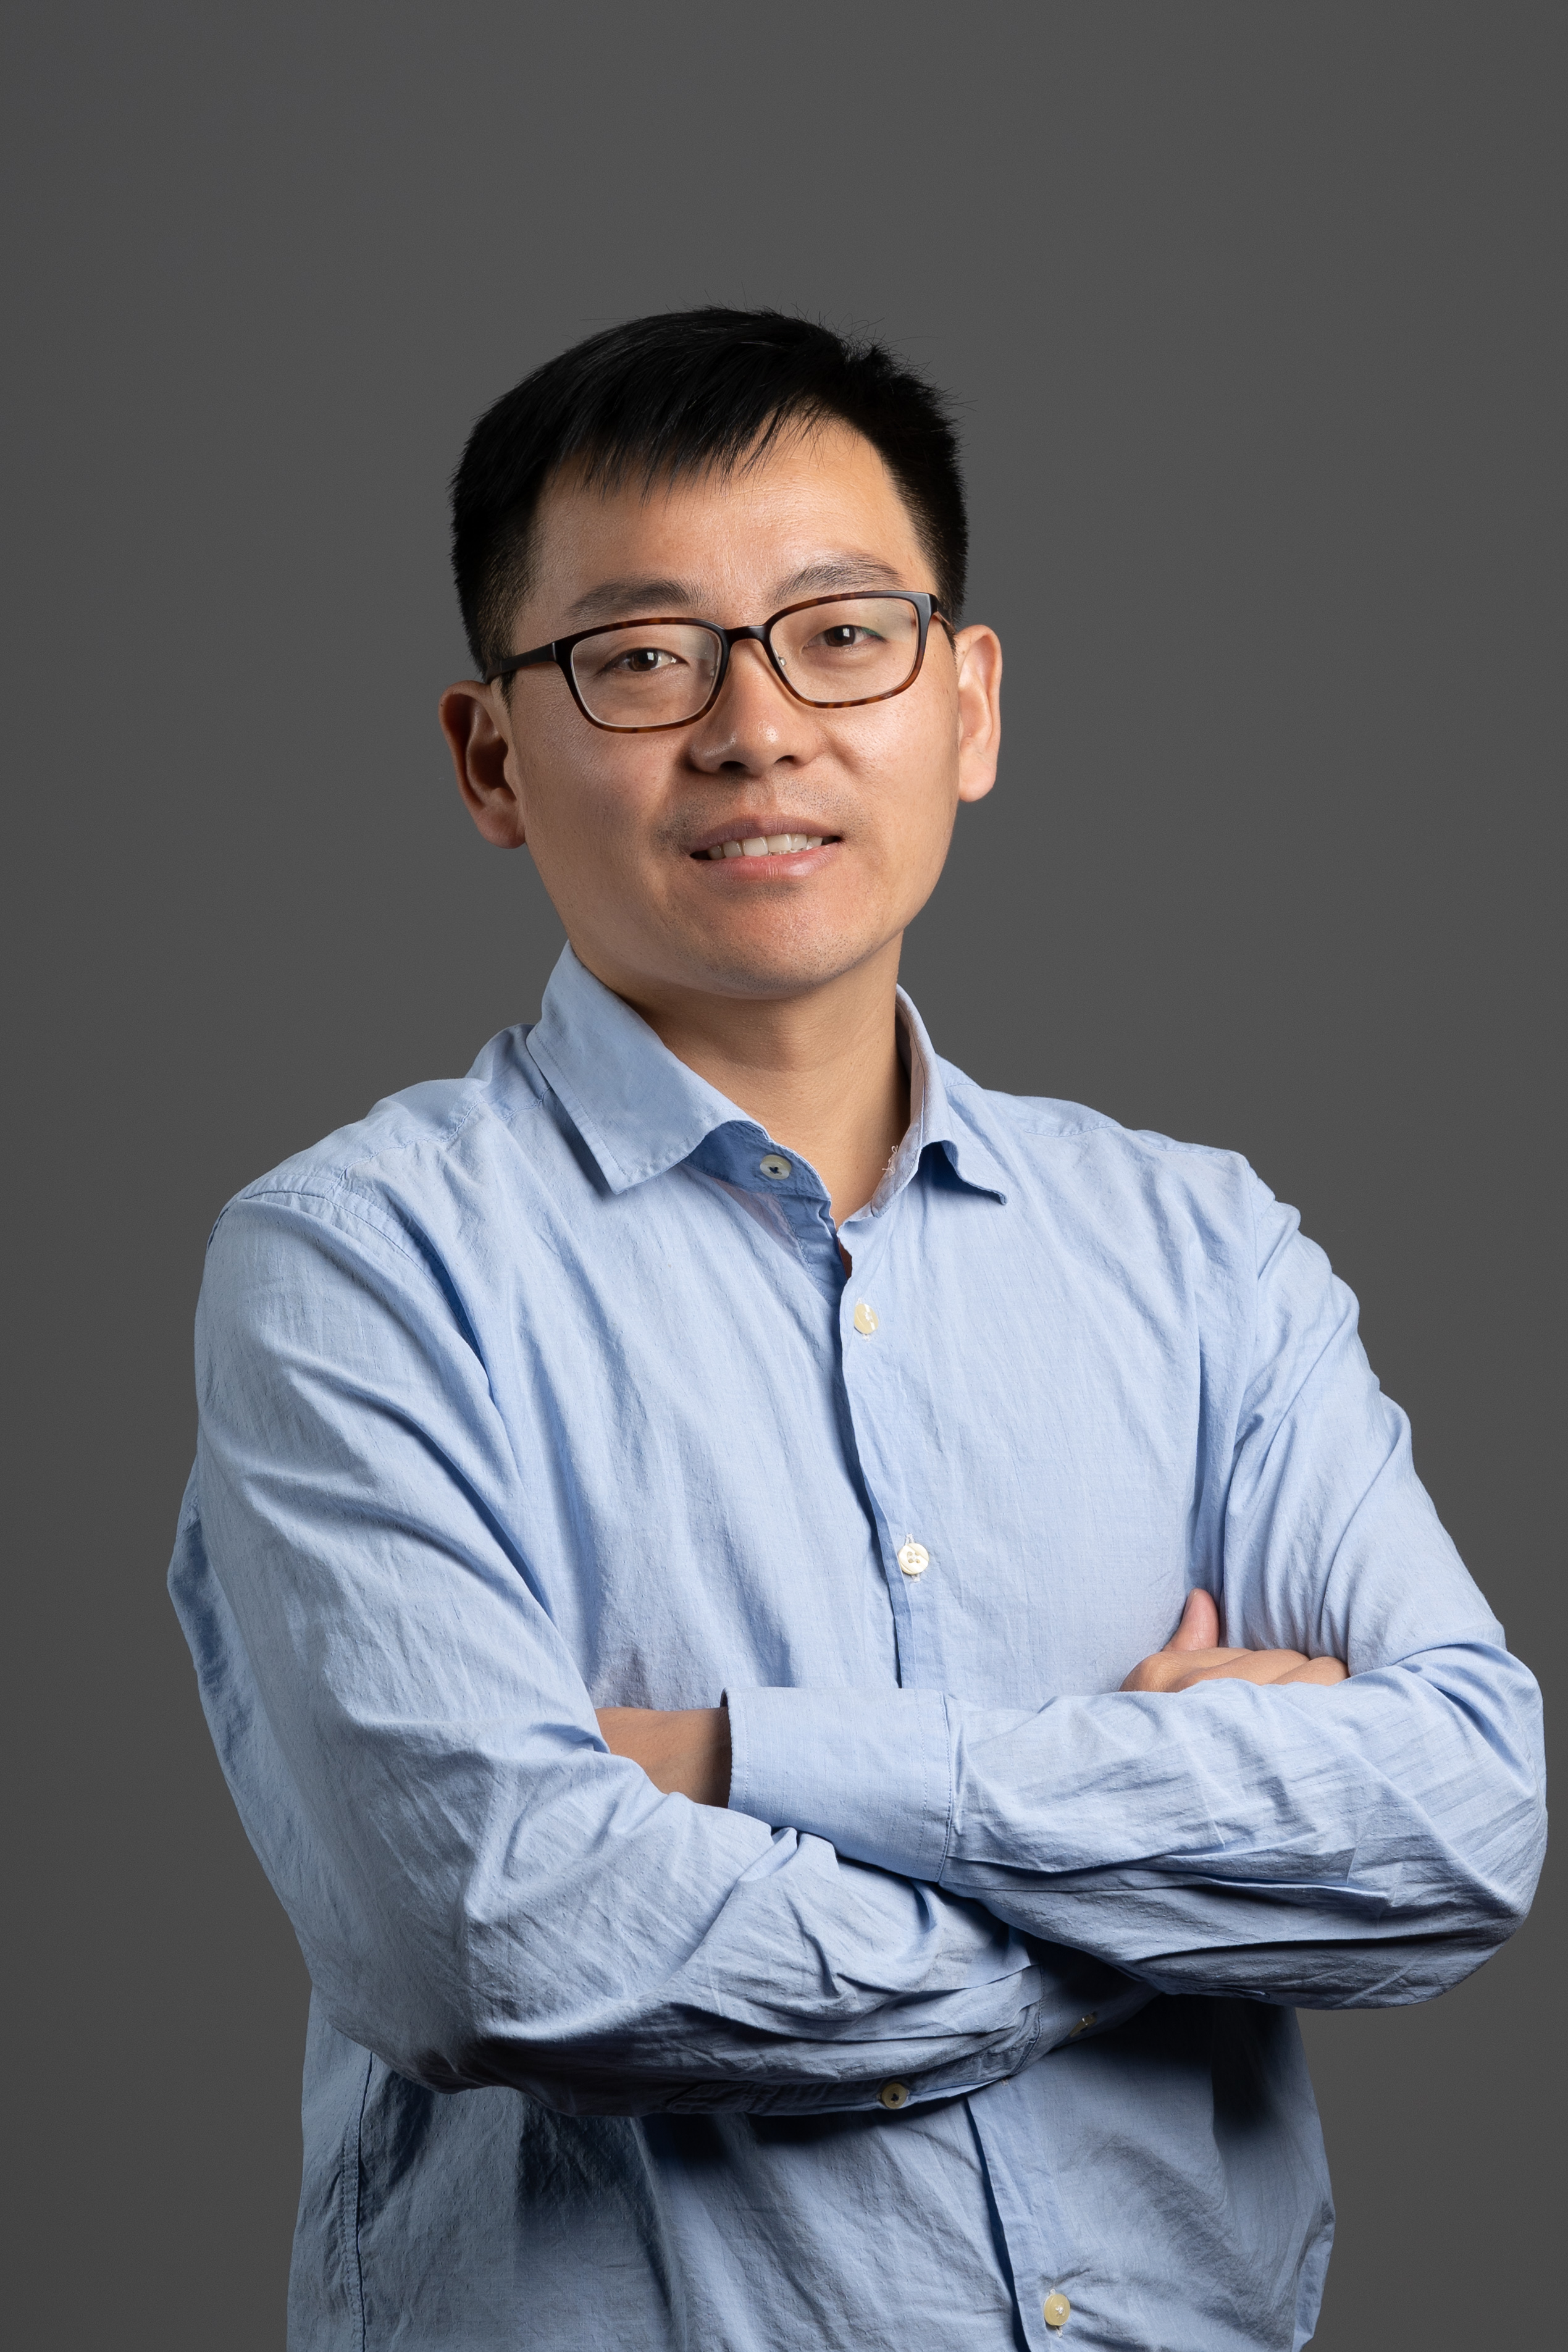 Liang Ma poses with crossed arms in front of grey background